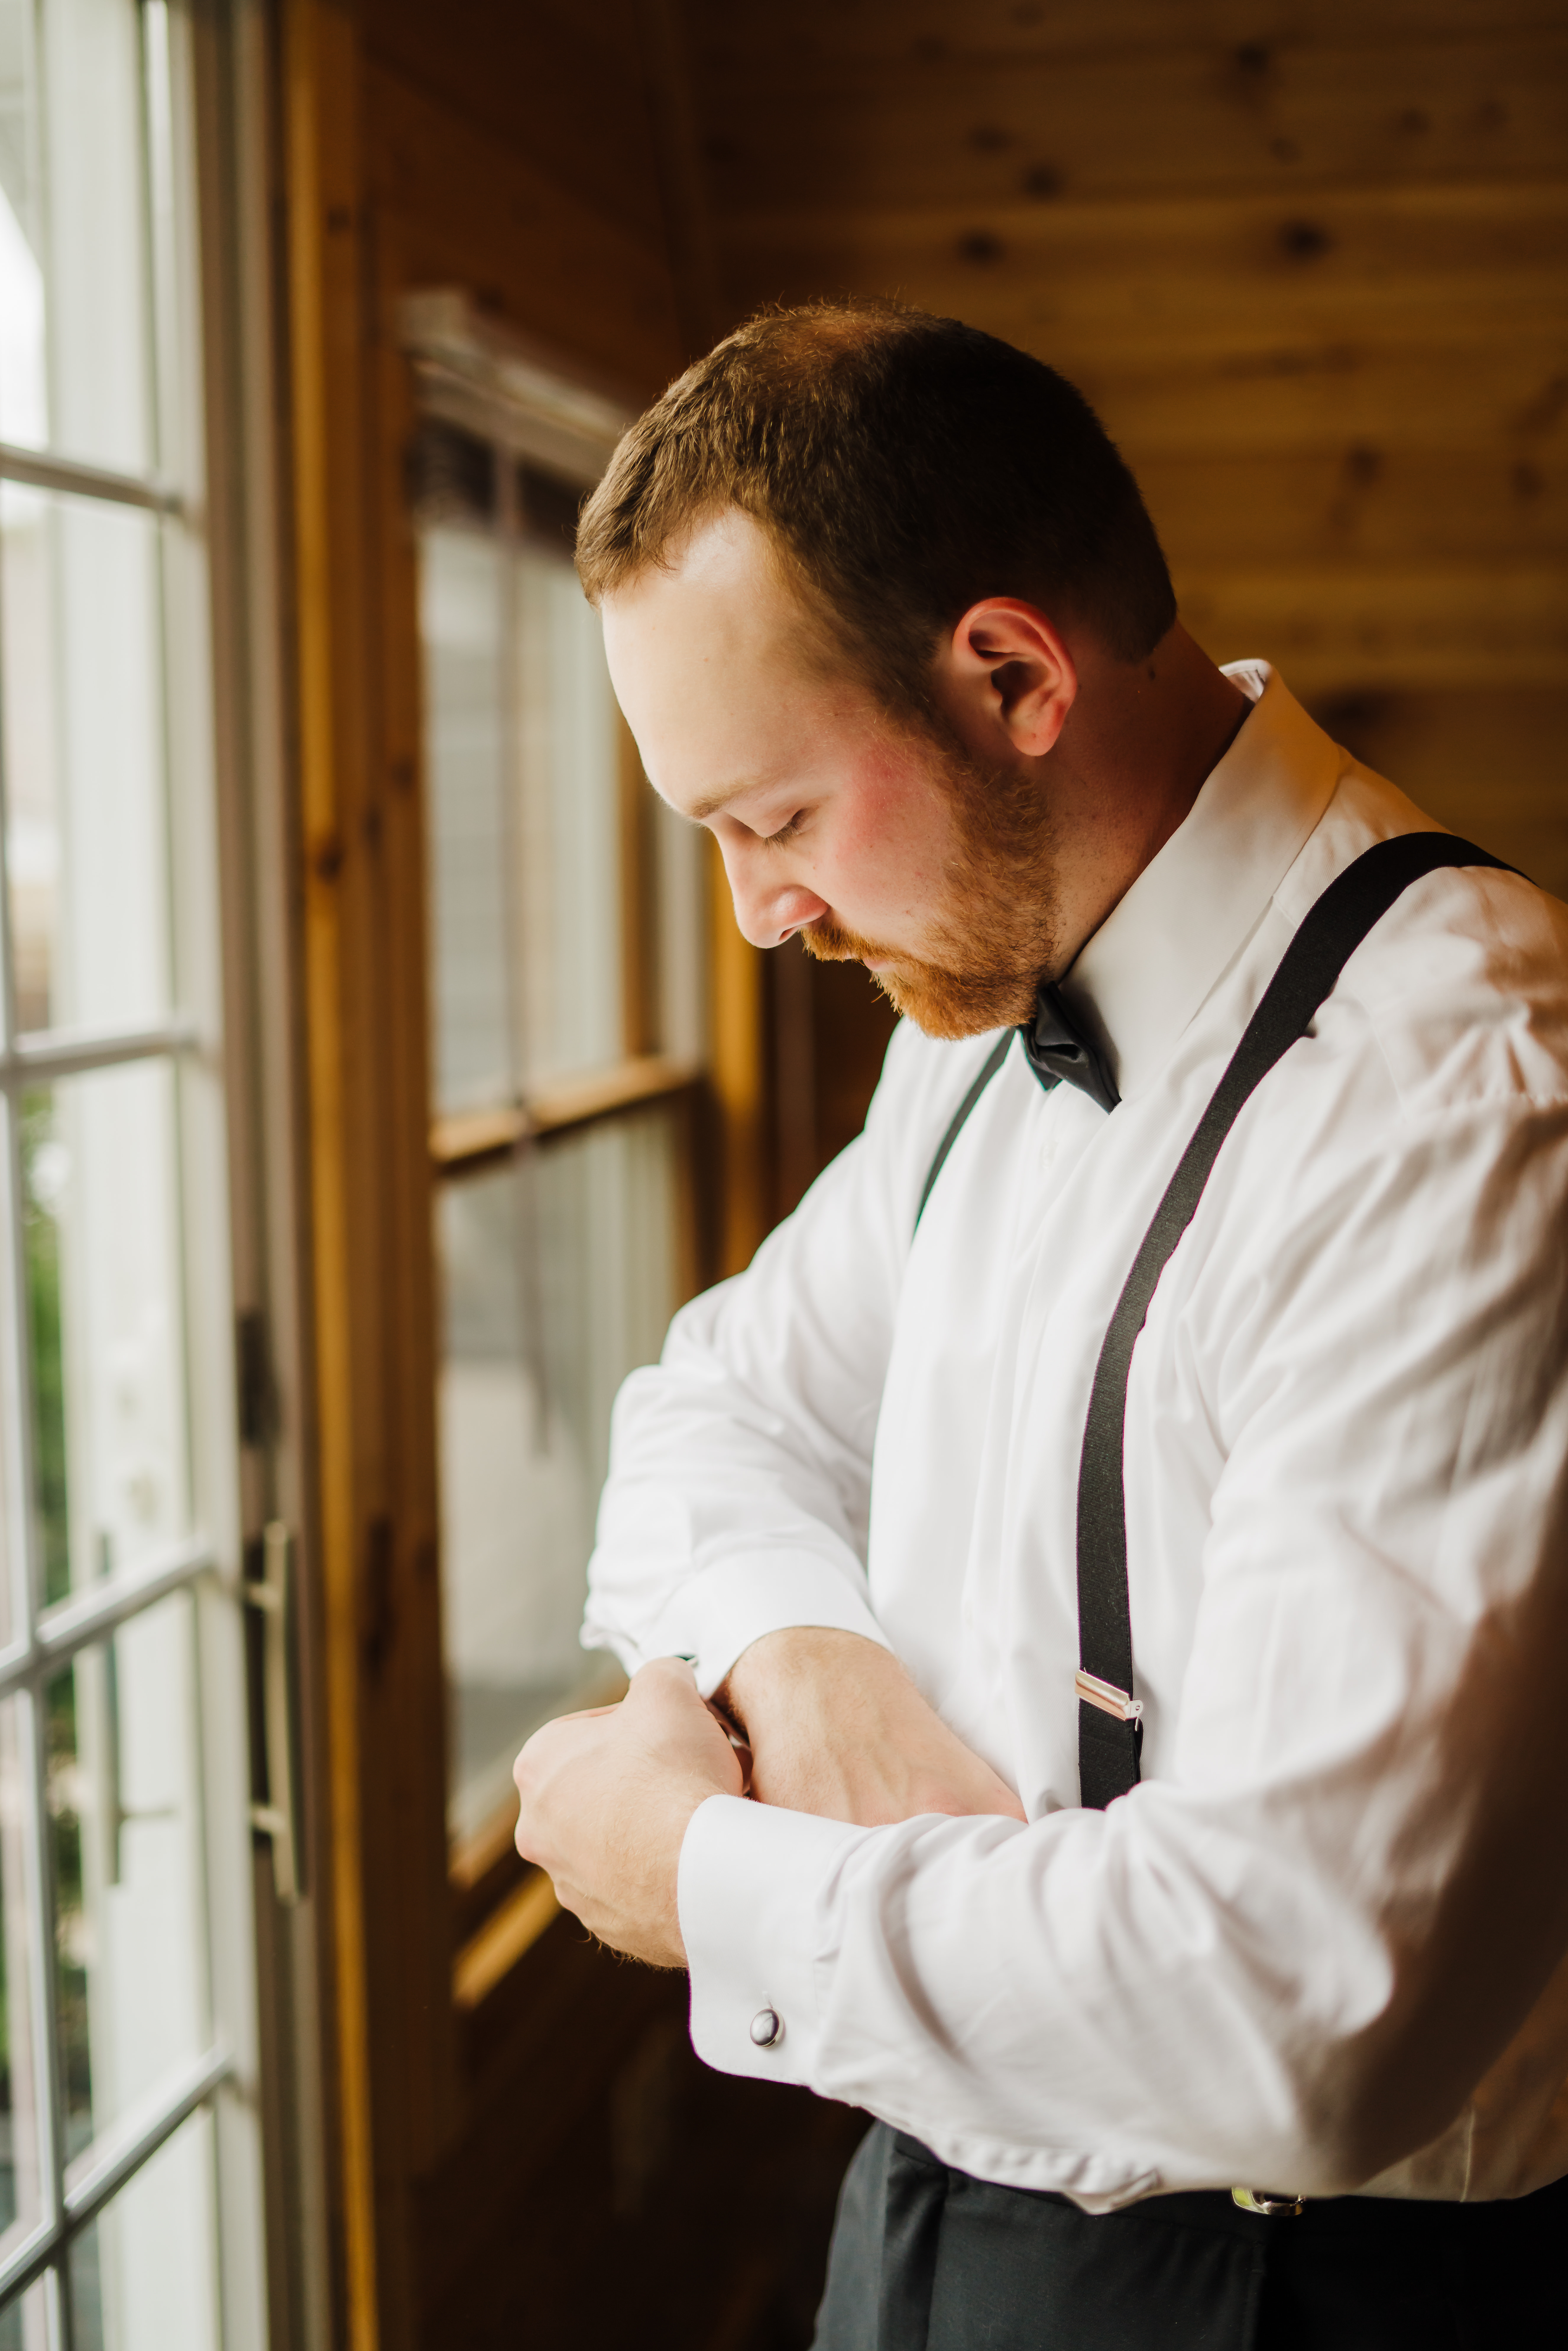 An excited groom gets ready for his forest green wedding ceremony in black suspenders and a bowtie. Groom outfit inspo Rustic wood wedding venue #forestgreenwedding #rusticweddingvenue #weddingplanning #wisconsinweddingphotographer #wisconsinweddingvenue